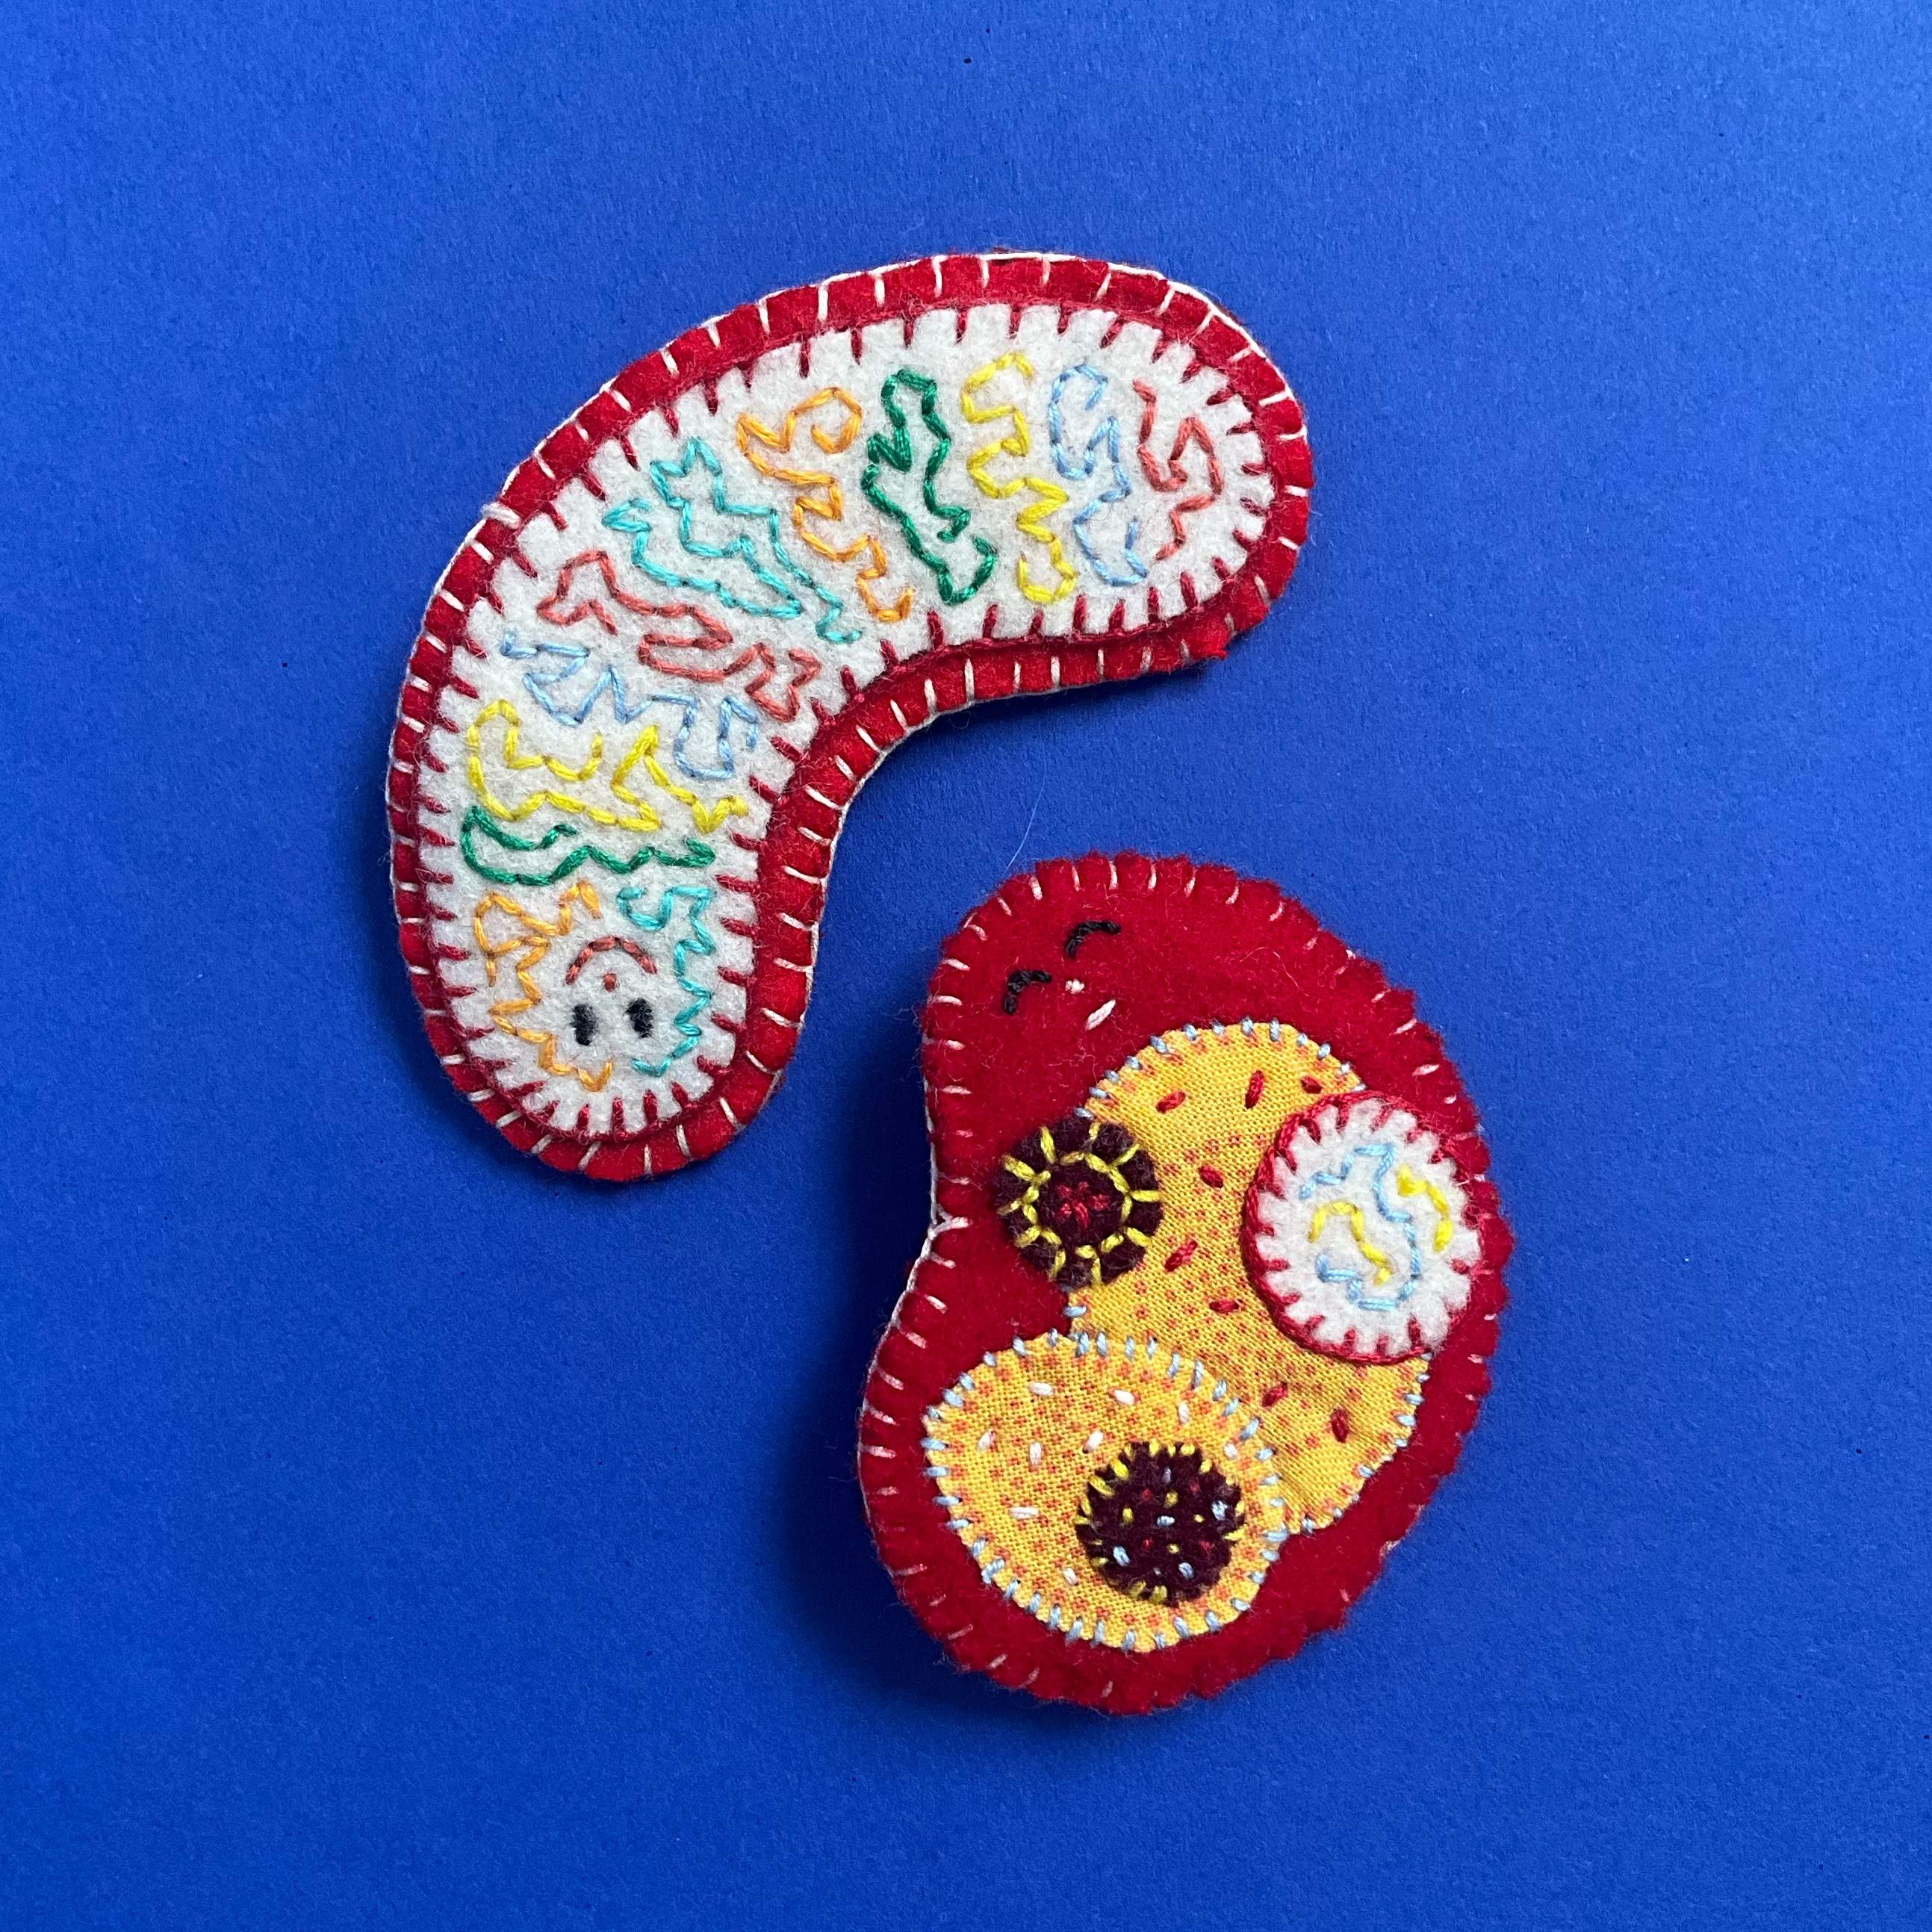 Embroidered microbes. Wool felt and cotton embroidery thread.